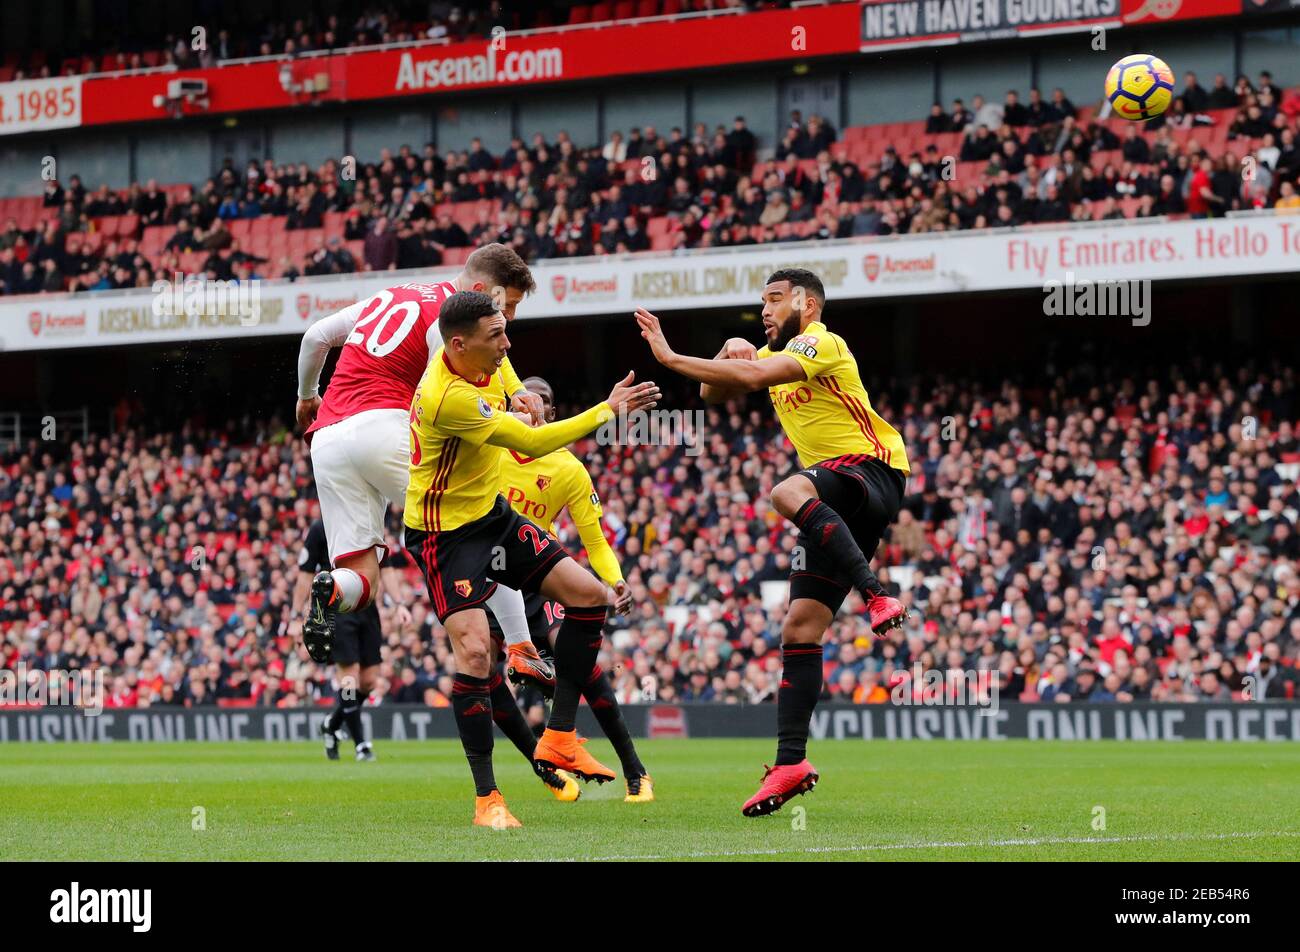 Soccer Football - Premier League - Arsenal vs Watford - Emirates Stadium, London, Britain - March 11, 2018   Arsenal's Shkodran Mustafi scores their first goal        REUTERS/Eddie Keogh    EDITORIAL USE ONLY. No use with unauthorized audio, video, data, fixture lists, club/league logos or 'live' services. Online in-match use limited to 75 images, no video emulation. No use in betting, games or single club/league/player publications.  Please contact your account representative for further details. Stock Photo